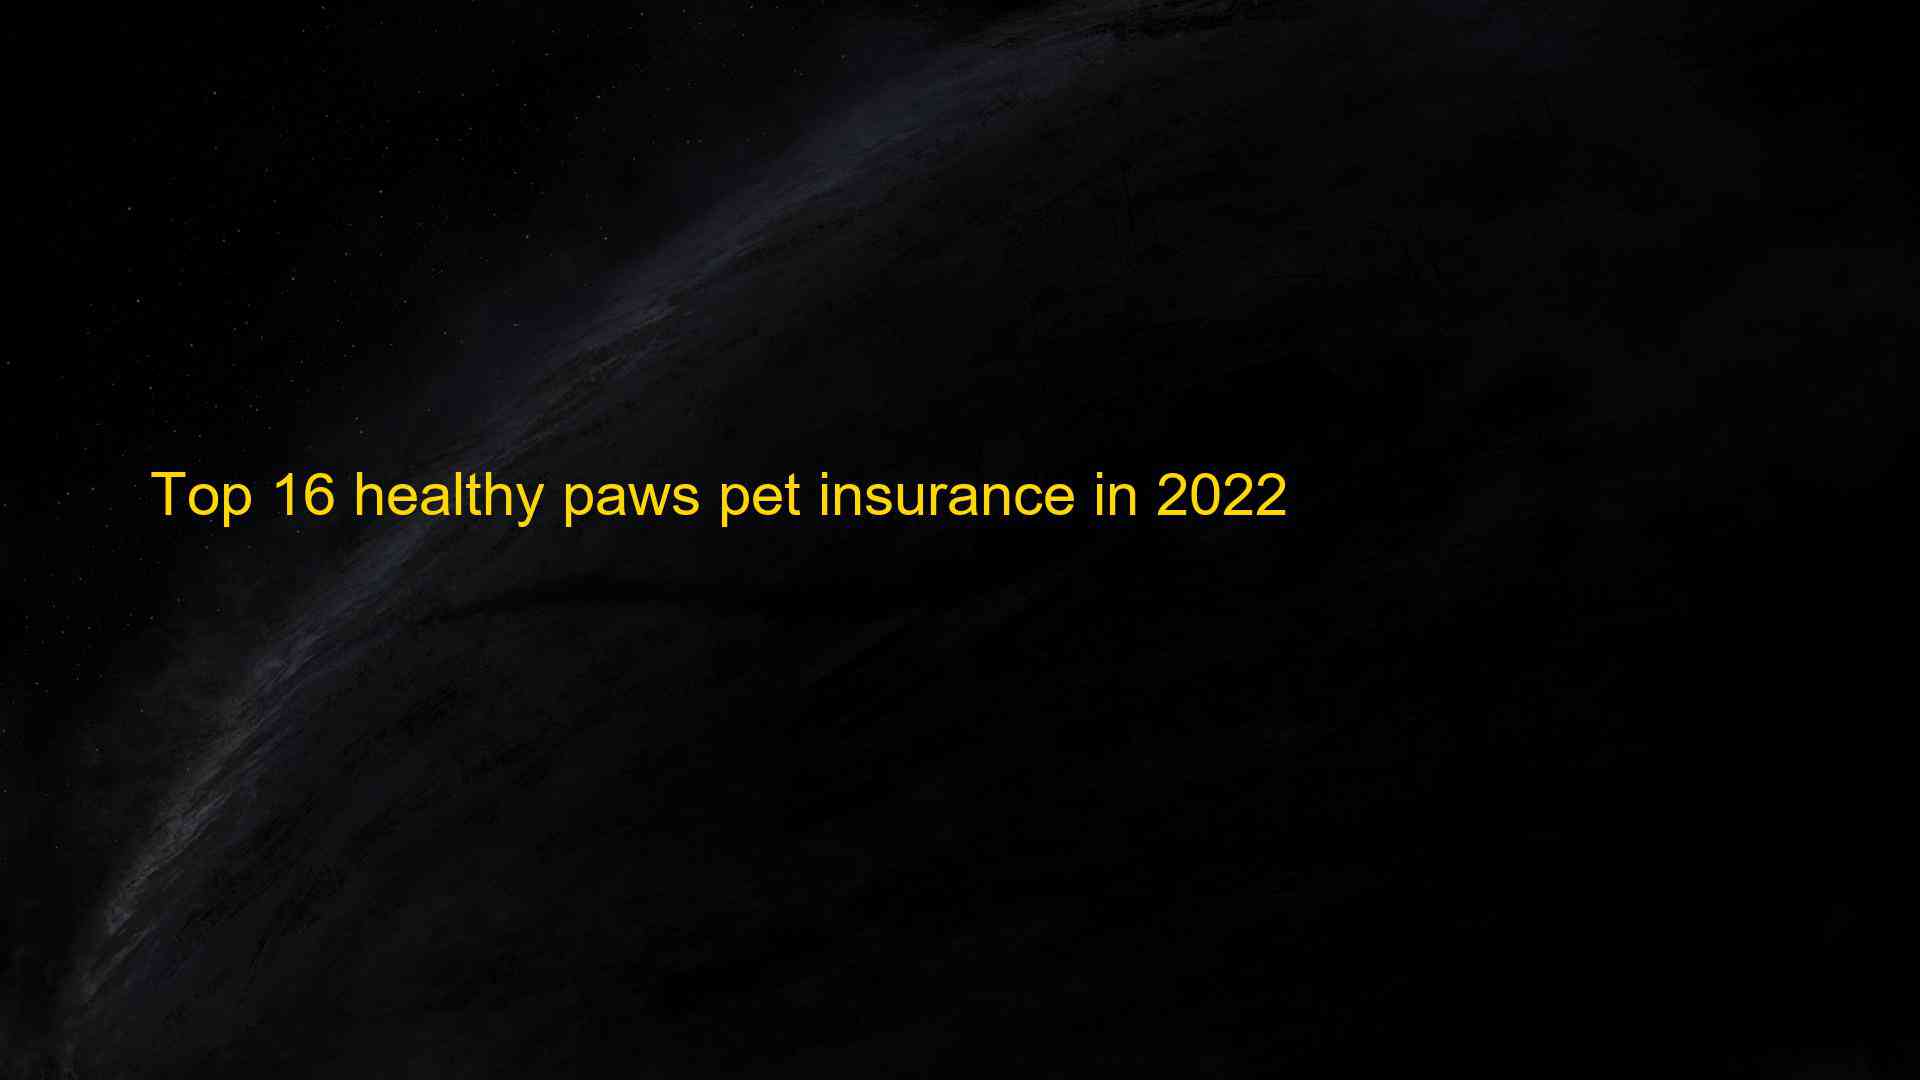 Top 16 healthy paws pet insurance in 2022 1660488279